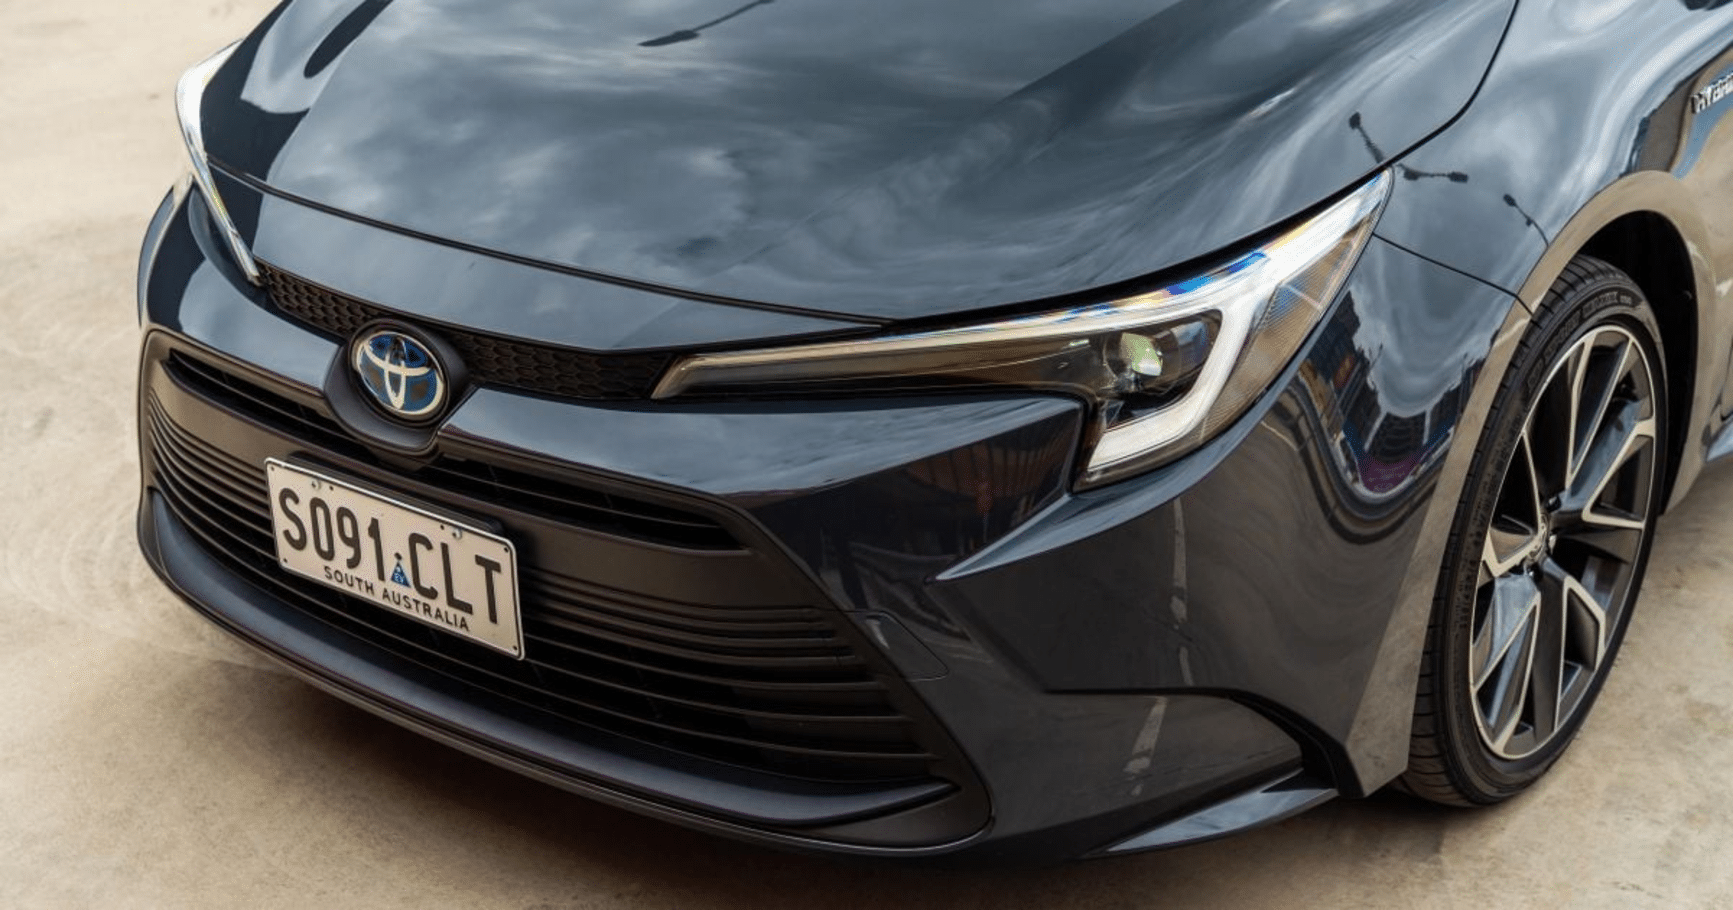 The Most Fuel Efficient Small Cars Under $40,000 in Australia